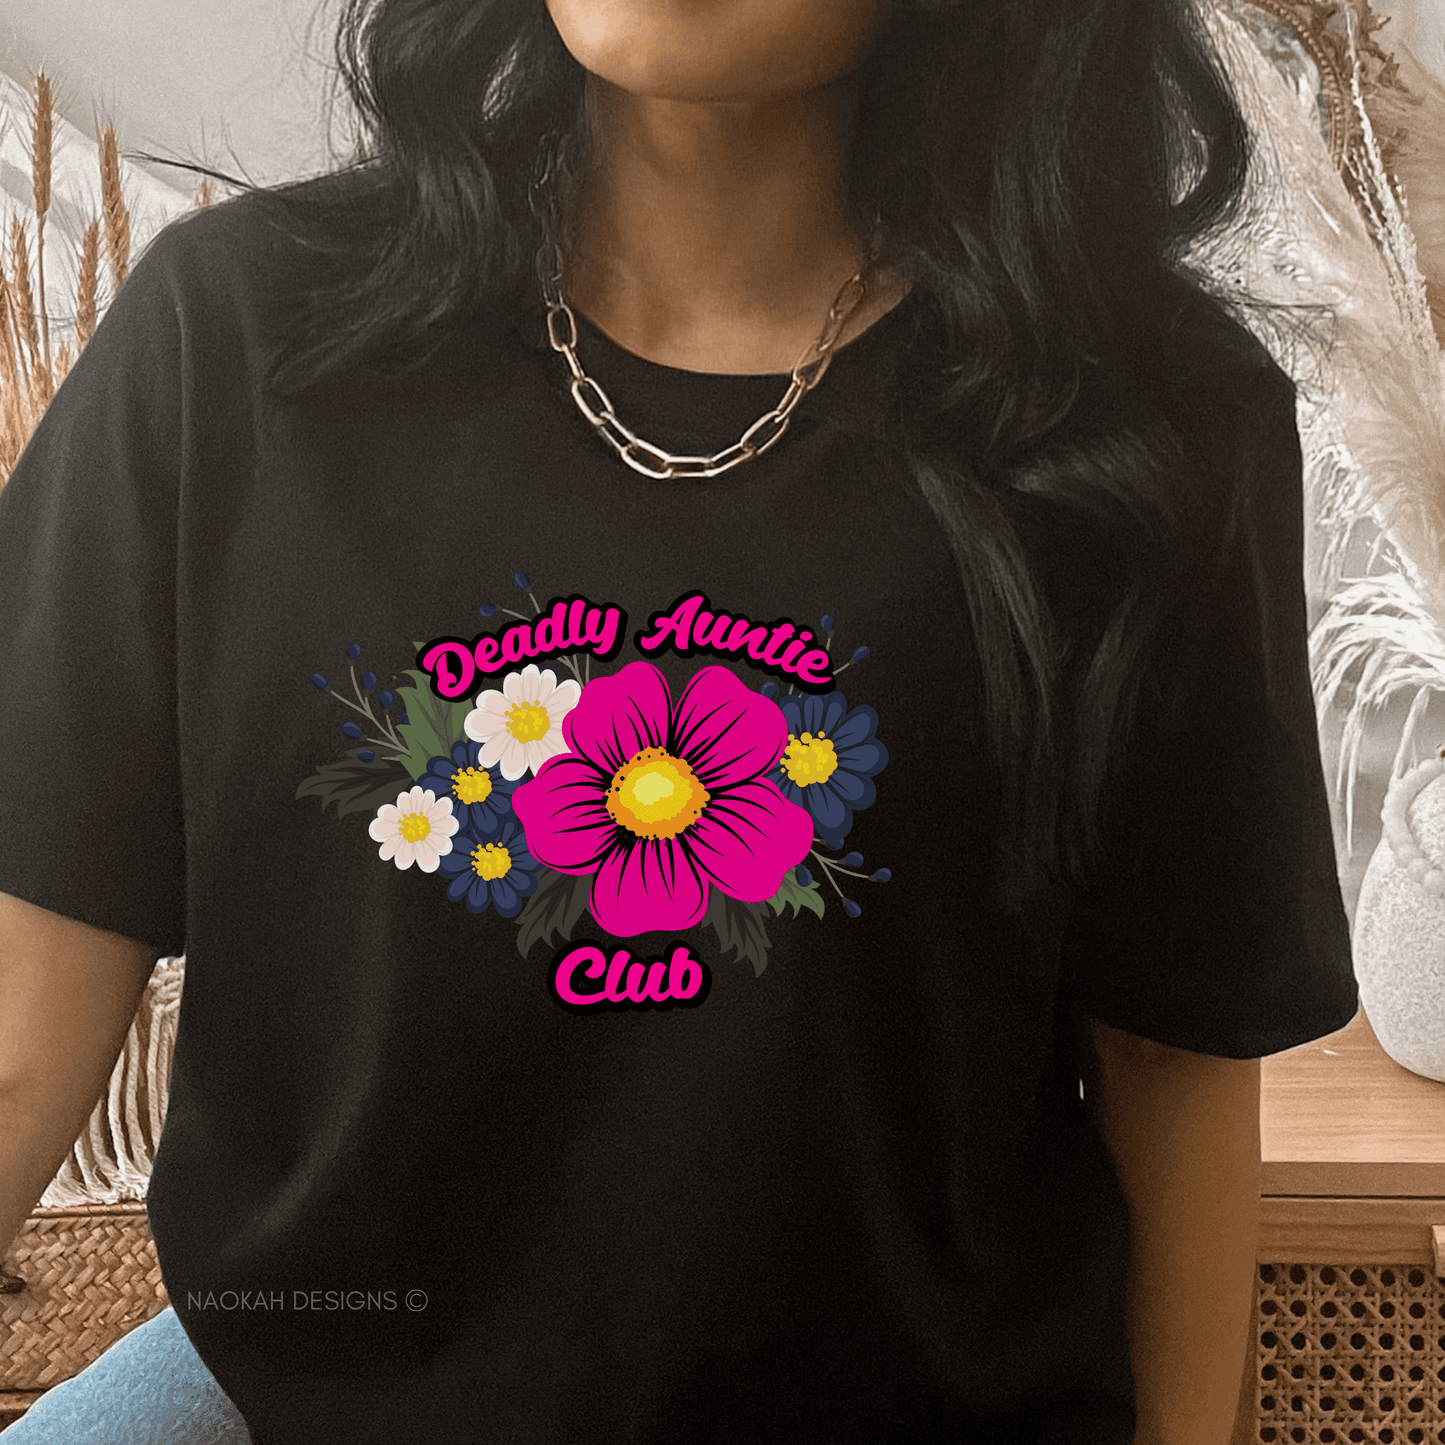 deadly auntie club shirt, deadly auntie tshirt, indigenous owned shop, auntie shirt, indigenous auntie, native auntie, real deadly, rez life